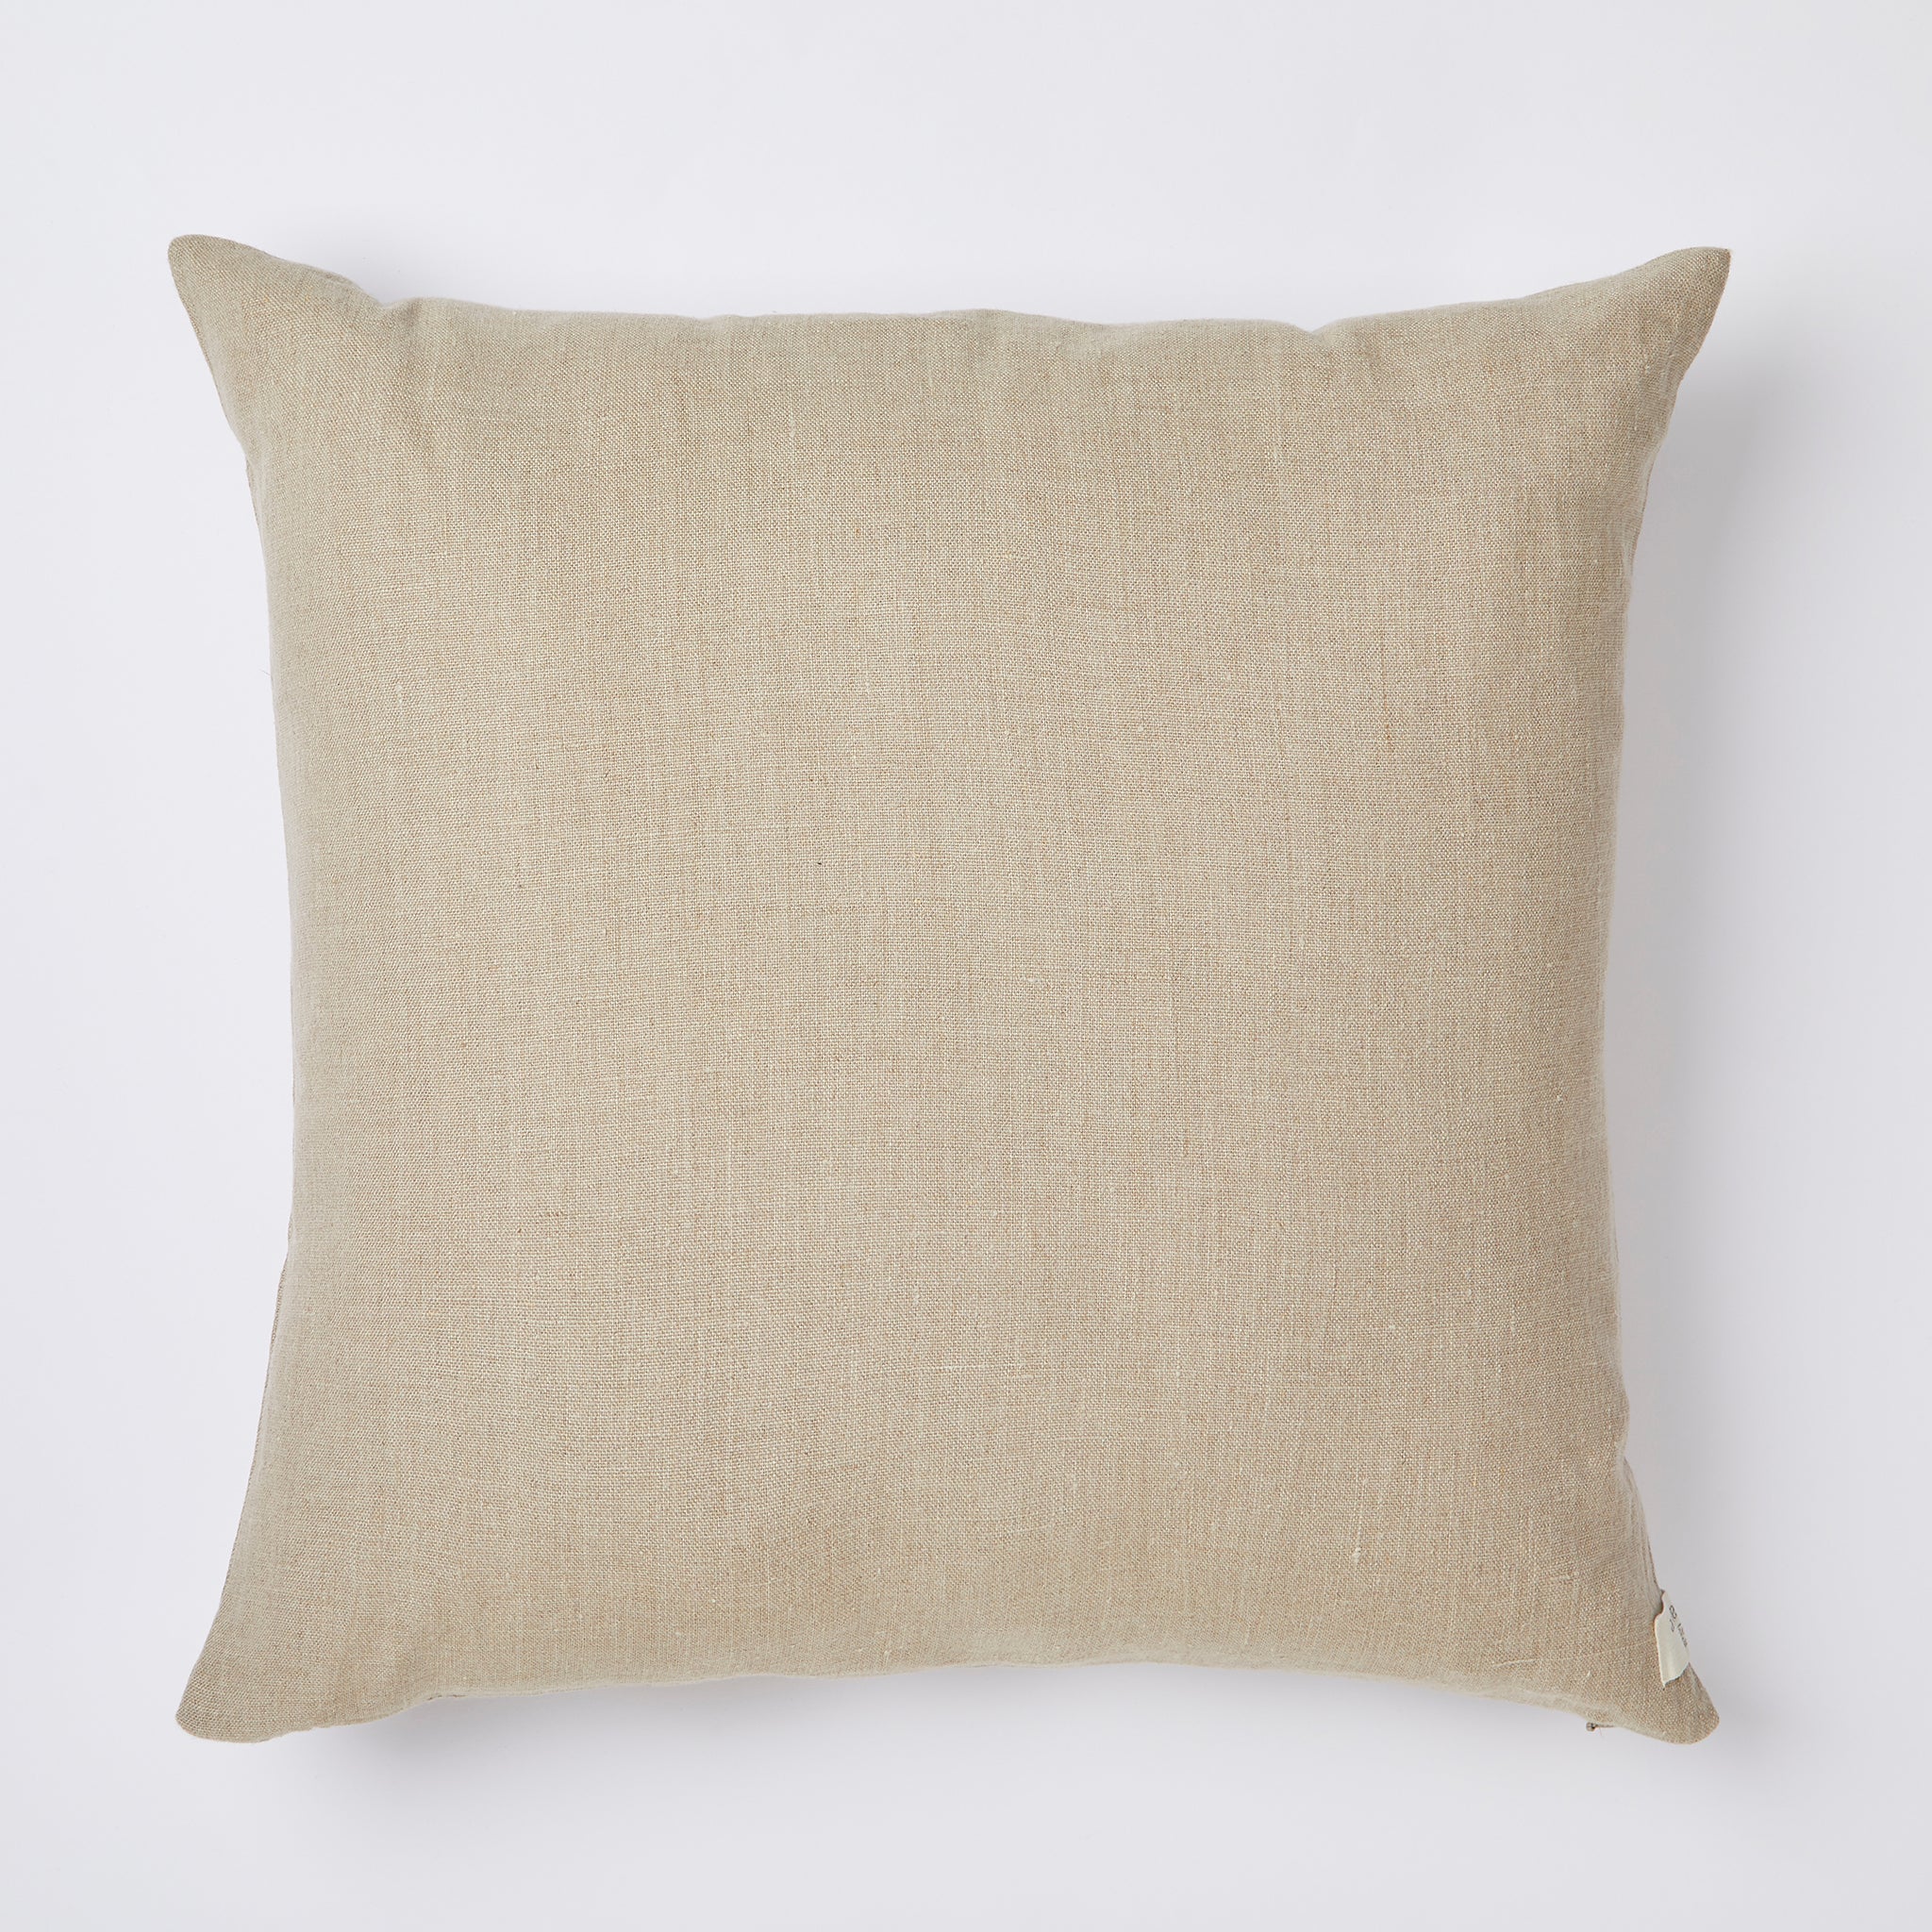 Linen cushion in color nature